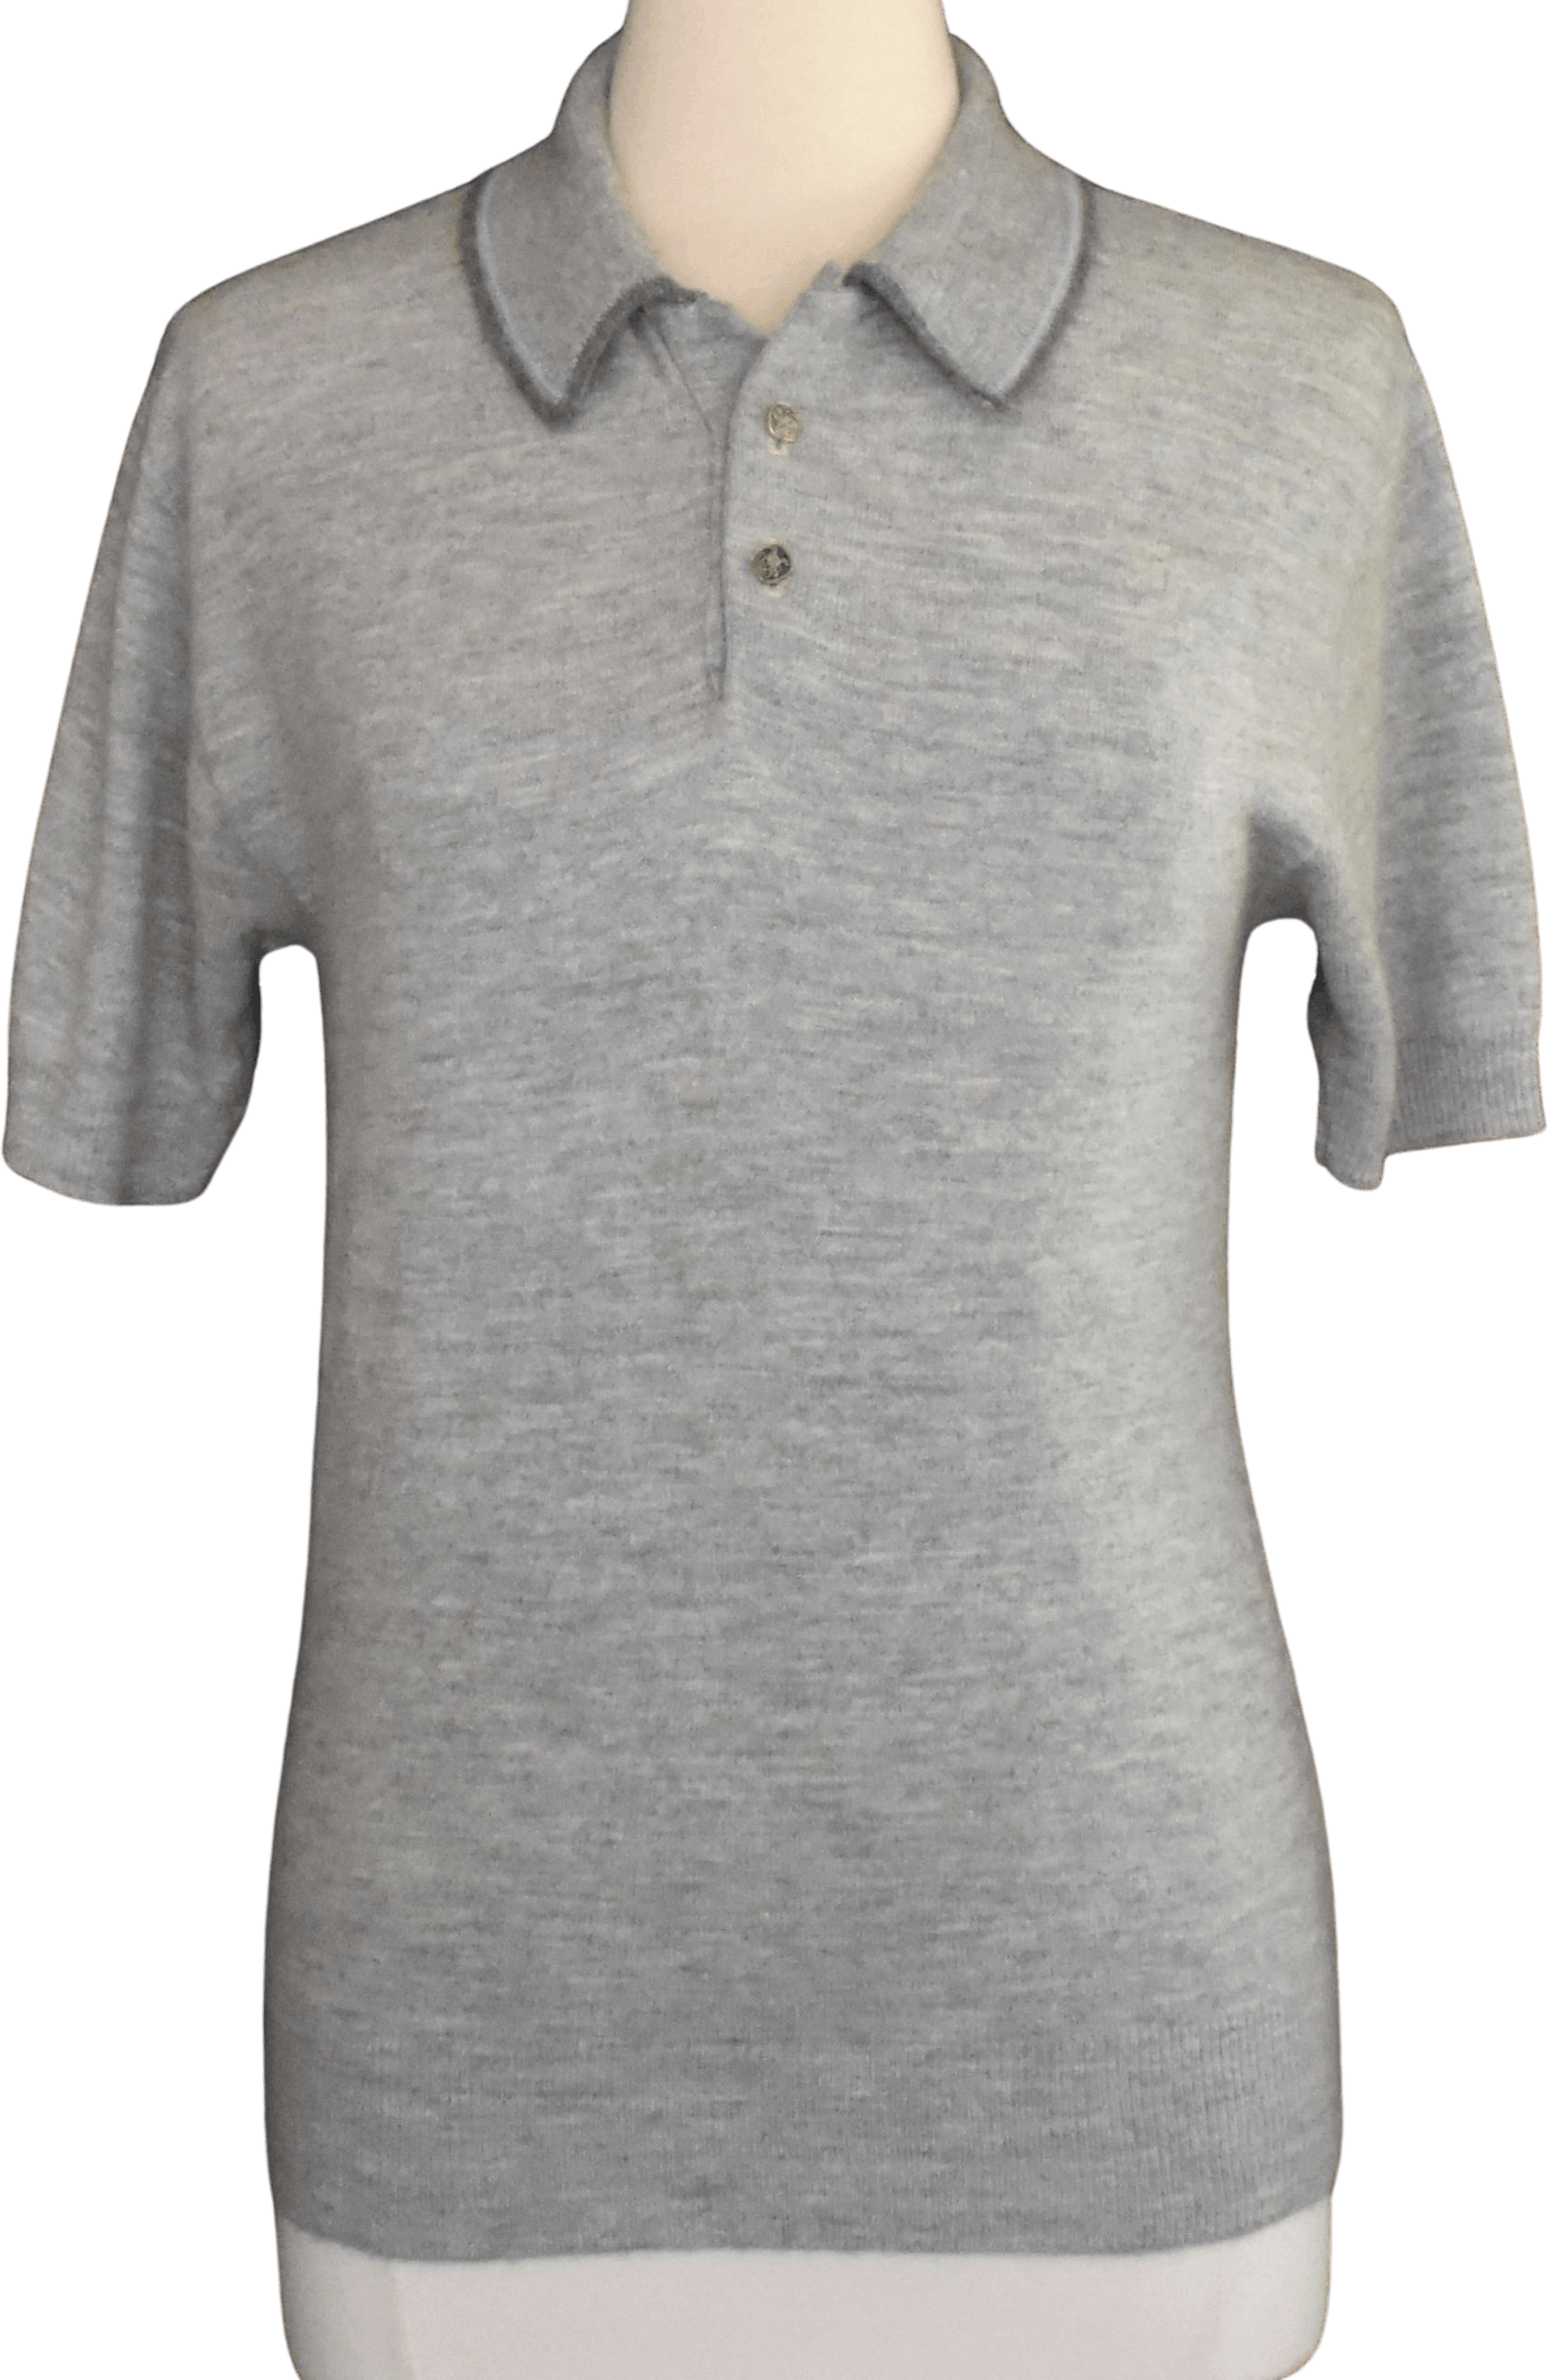 Vintage 60's Light Gray Mens Polo Shirt by Pebble Beach | Shop THRILLING